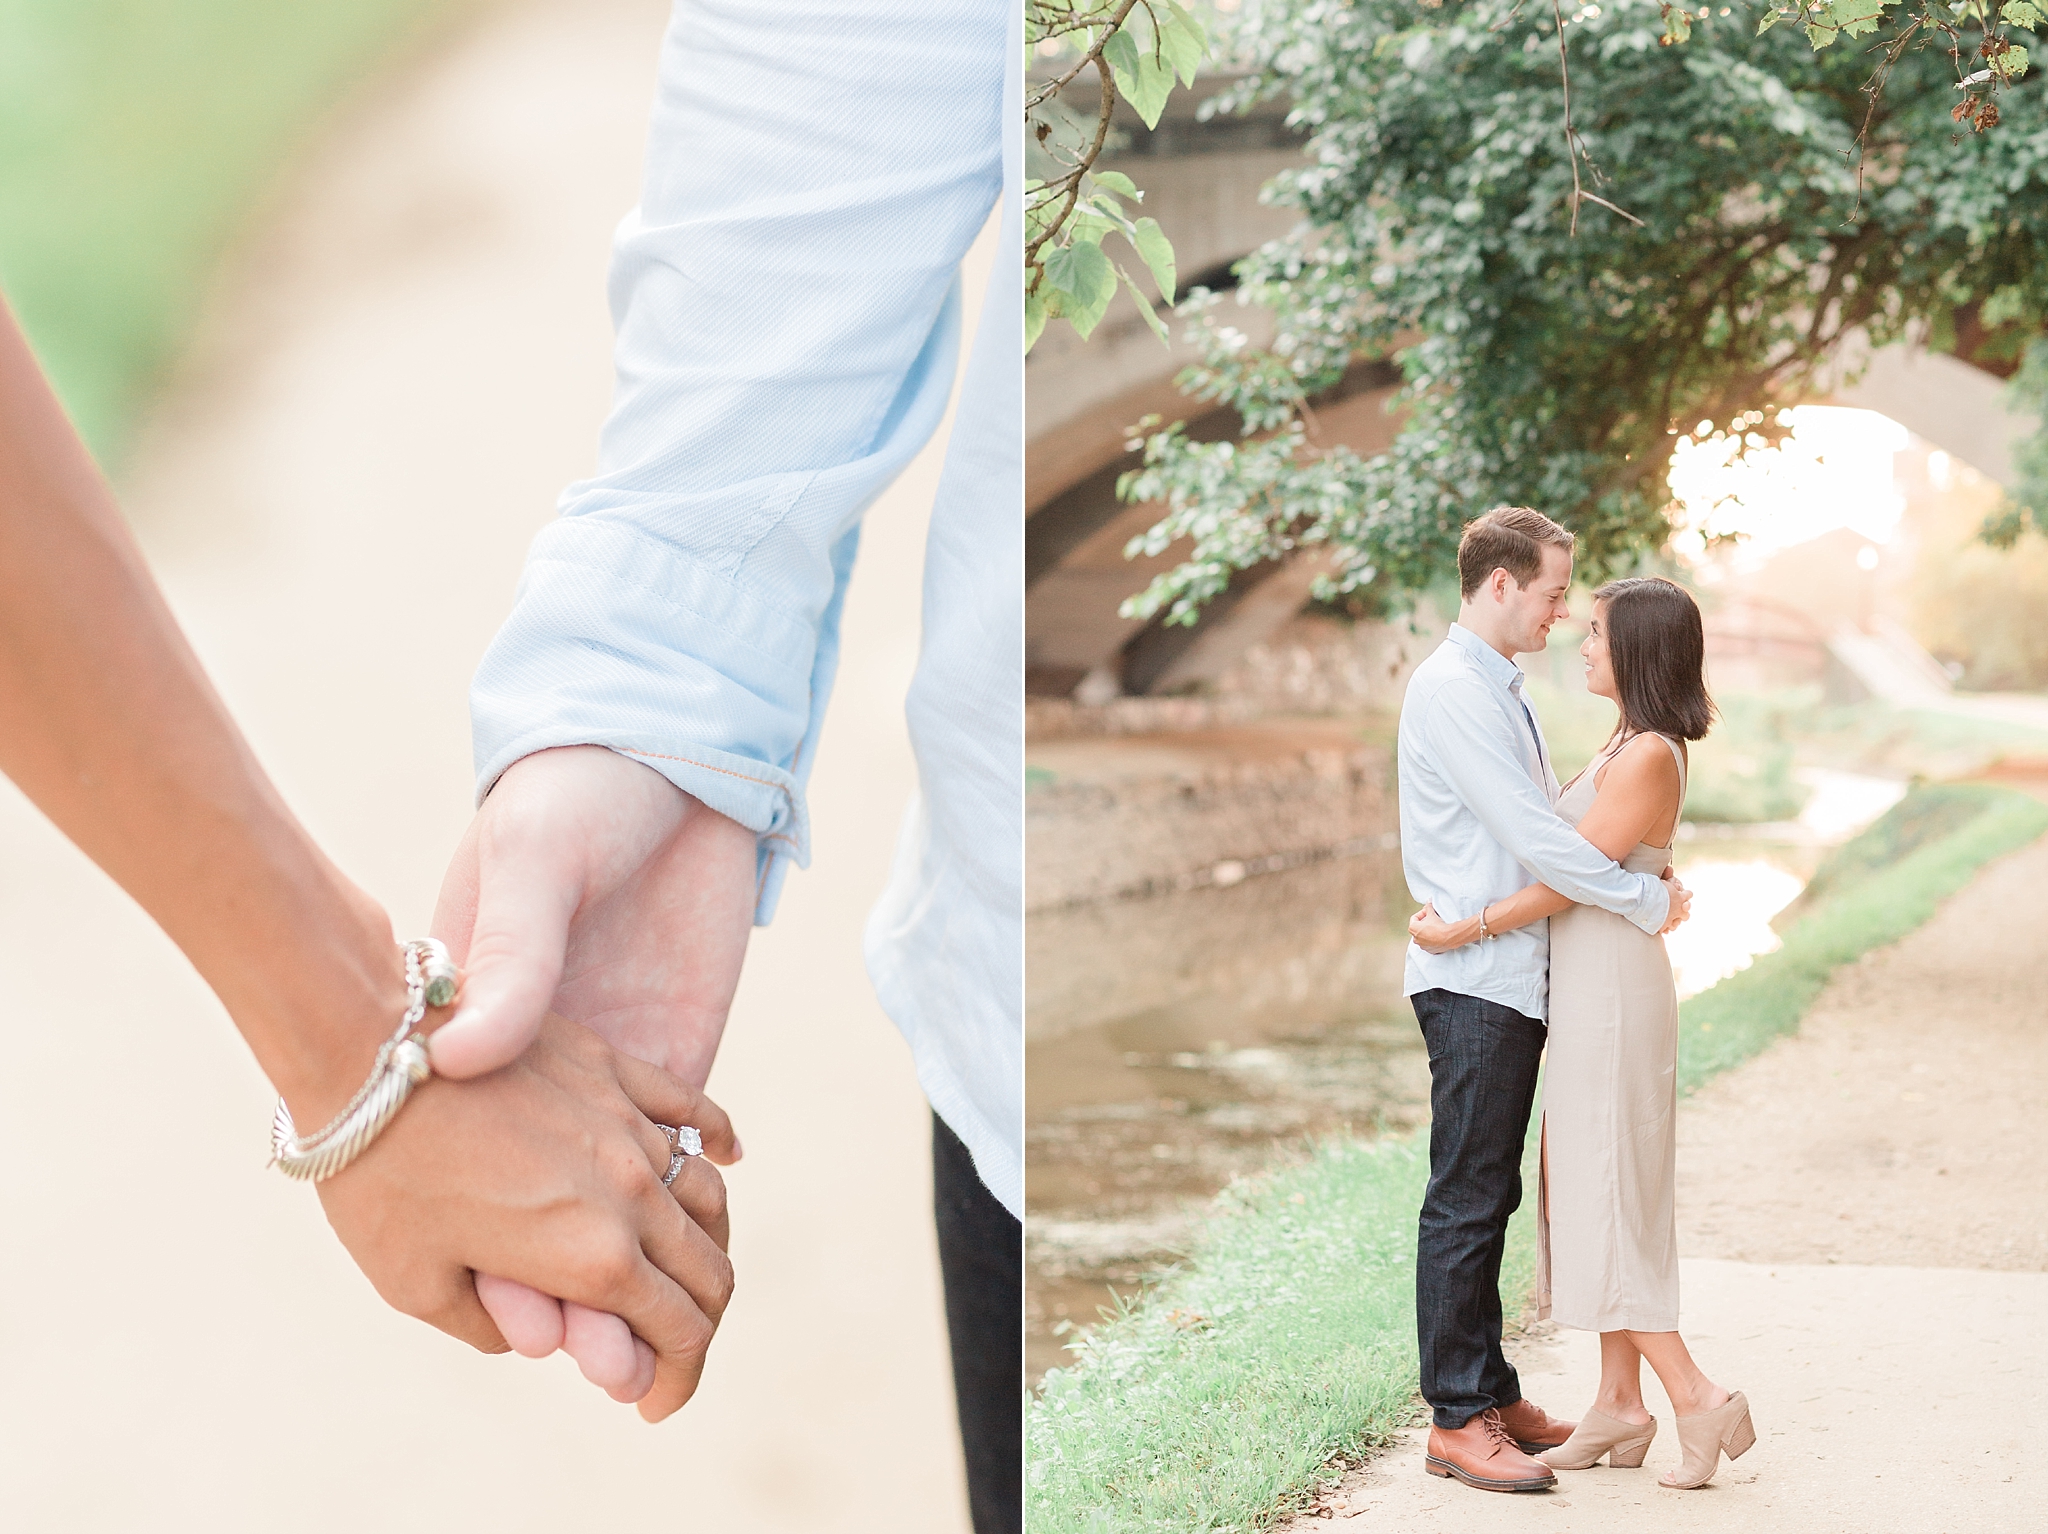 A romantic sunrise engagement session in the Georgetown area of Washington, DC features the stylish couple's Vespa.